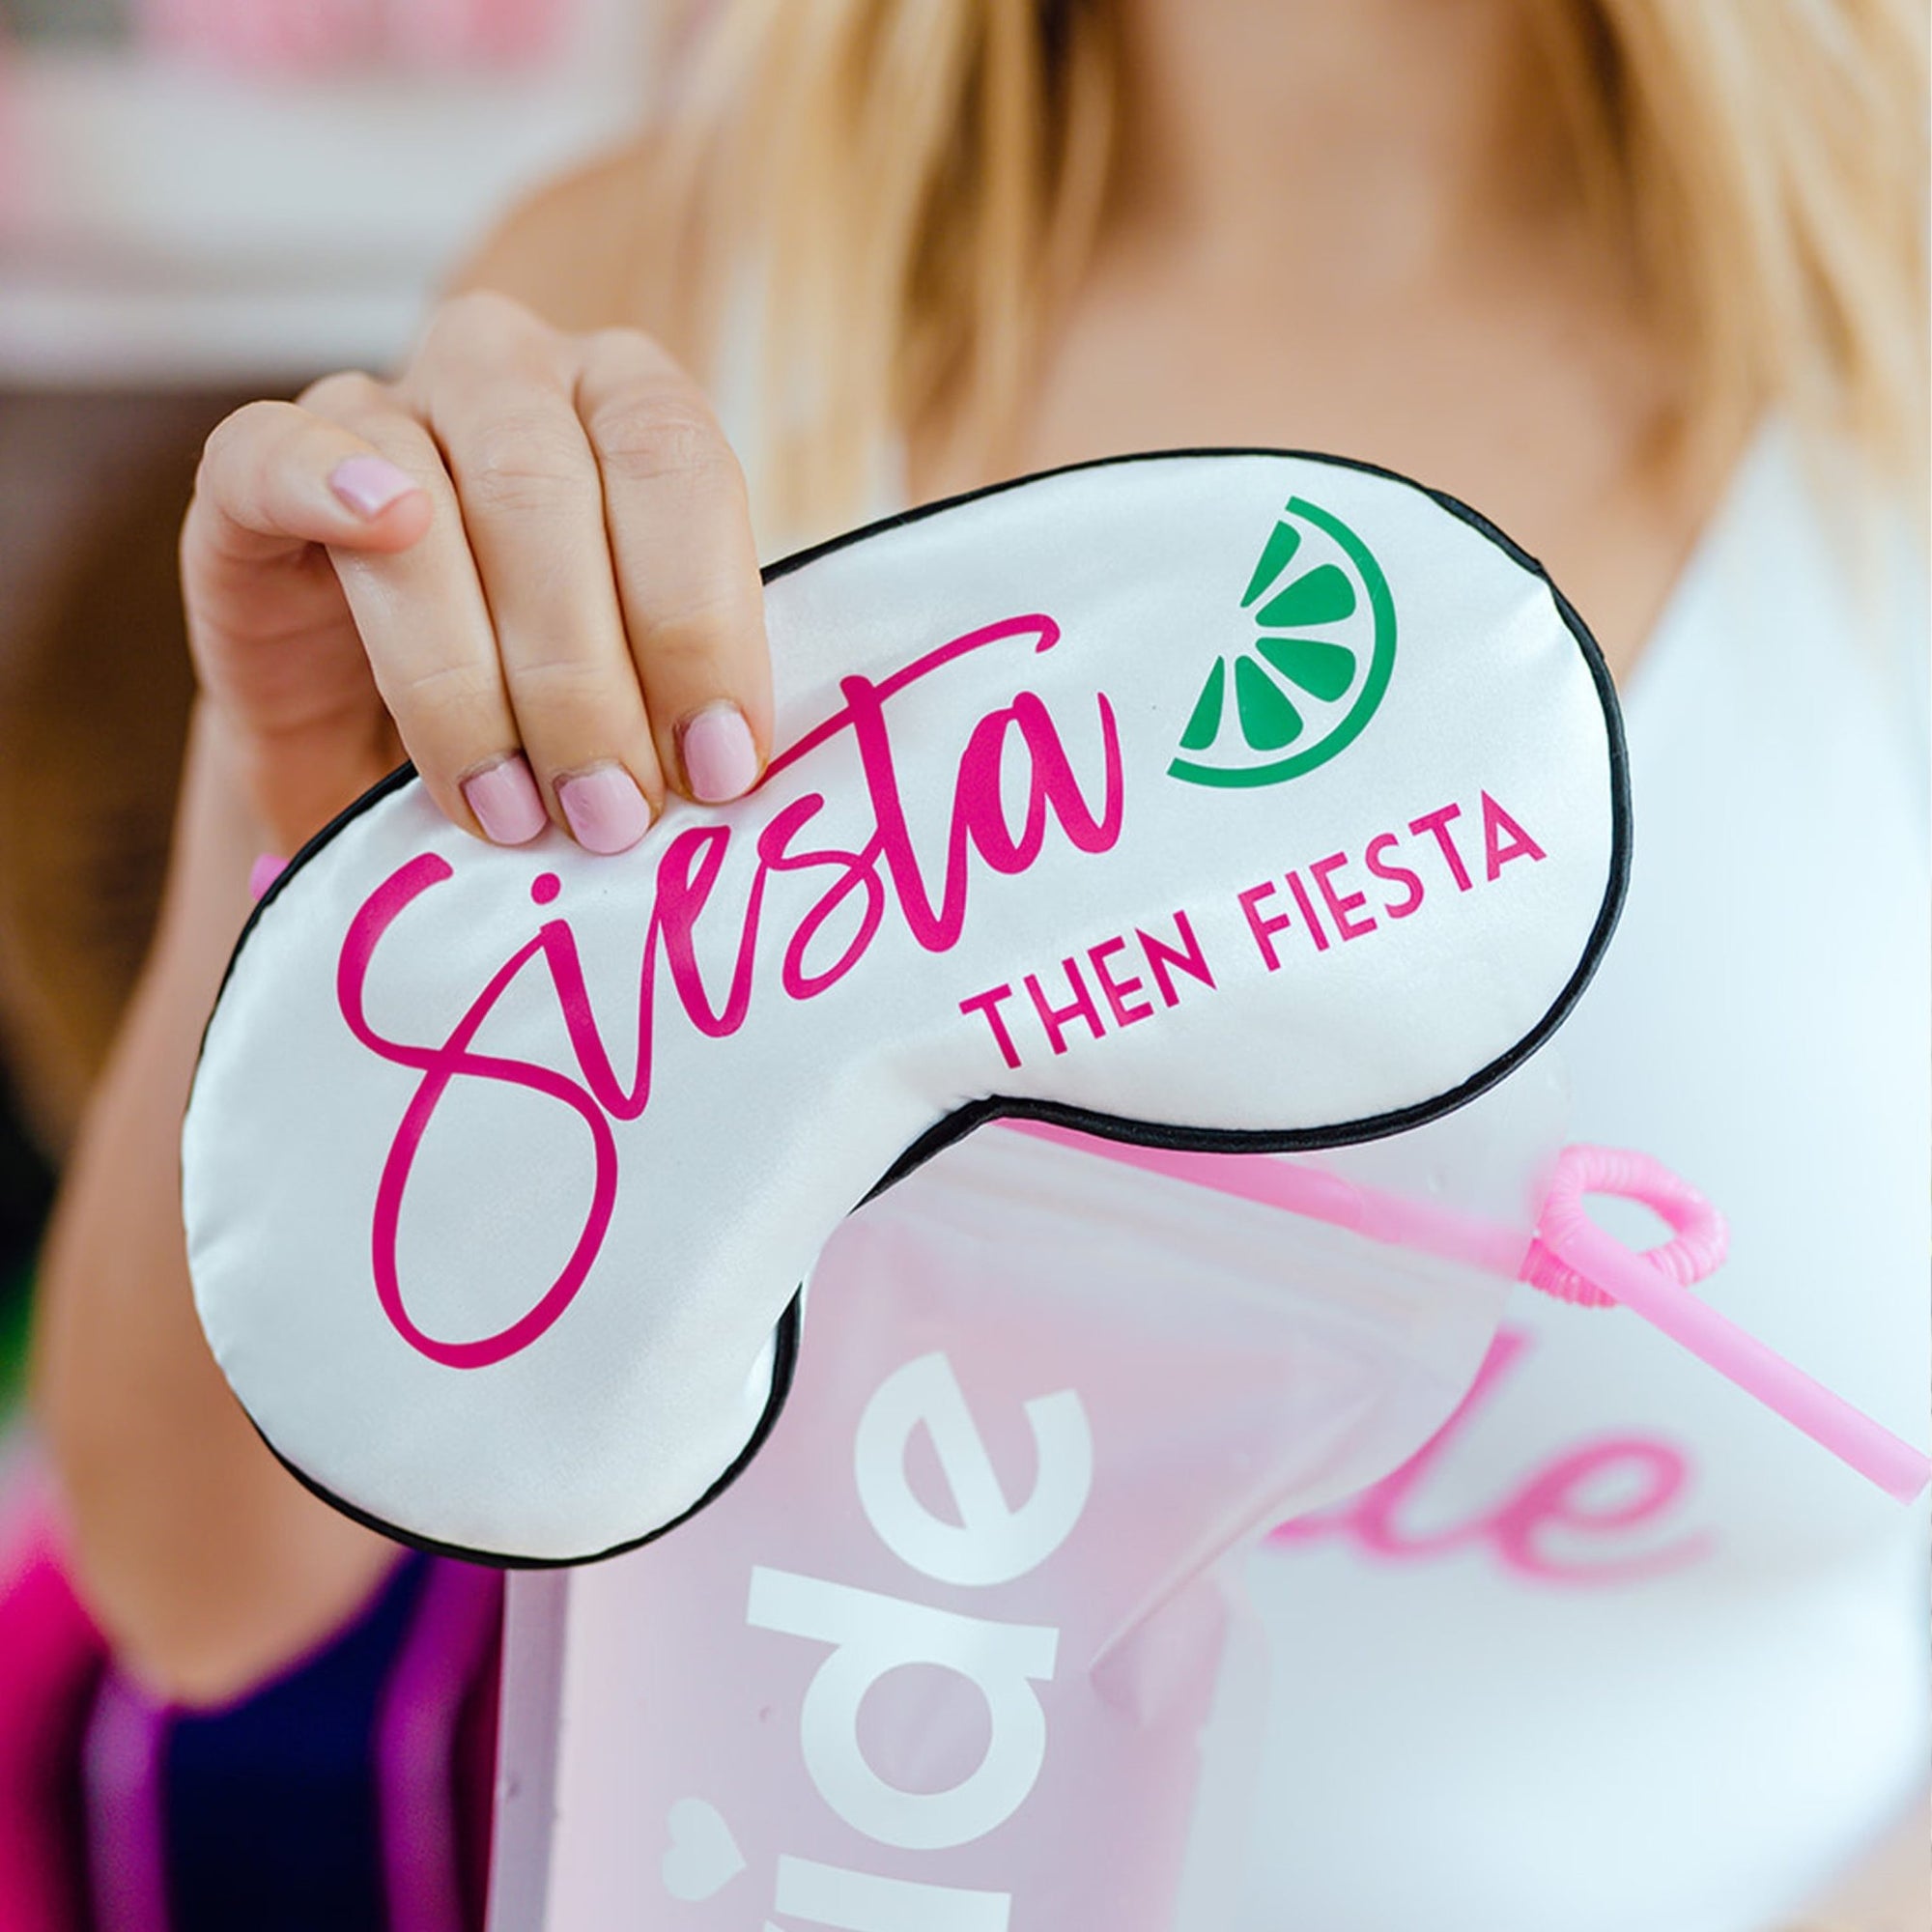 Pink and white sleep masks are customized with a pink design that says "Siesta then Fiesta".